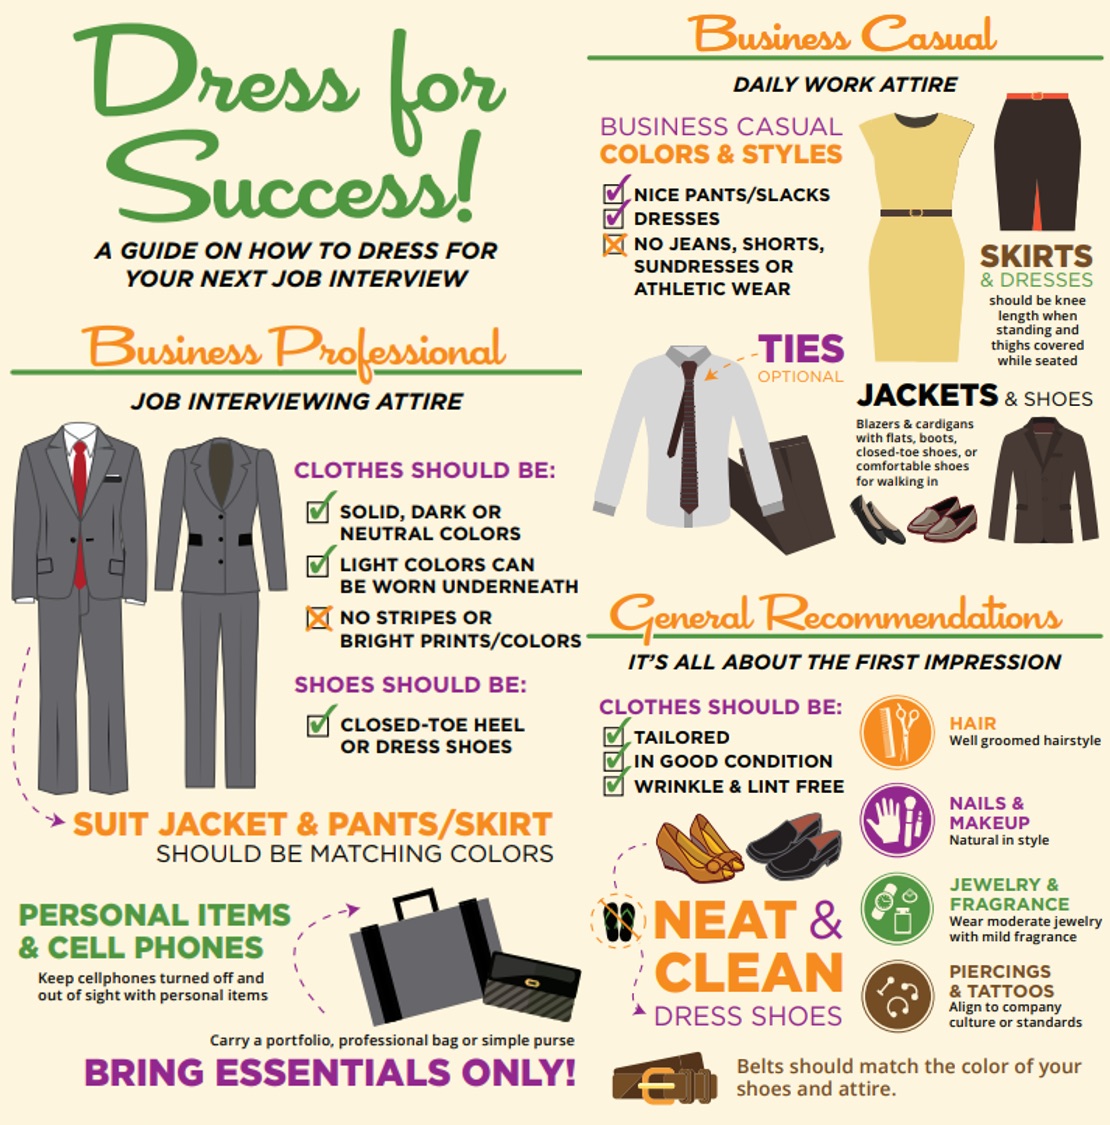 How to dress professionally: 5 tips to finding the perfect